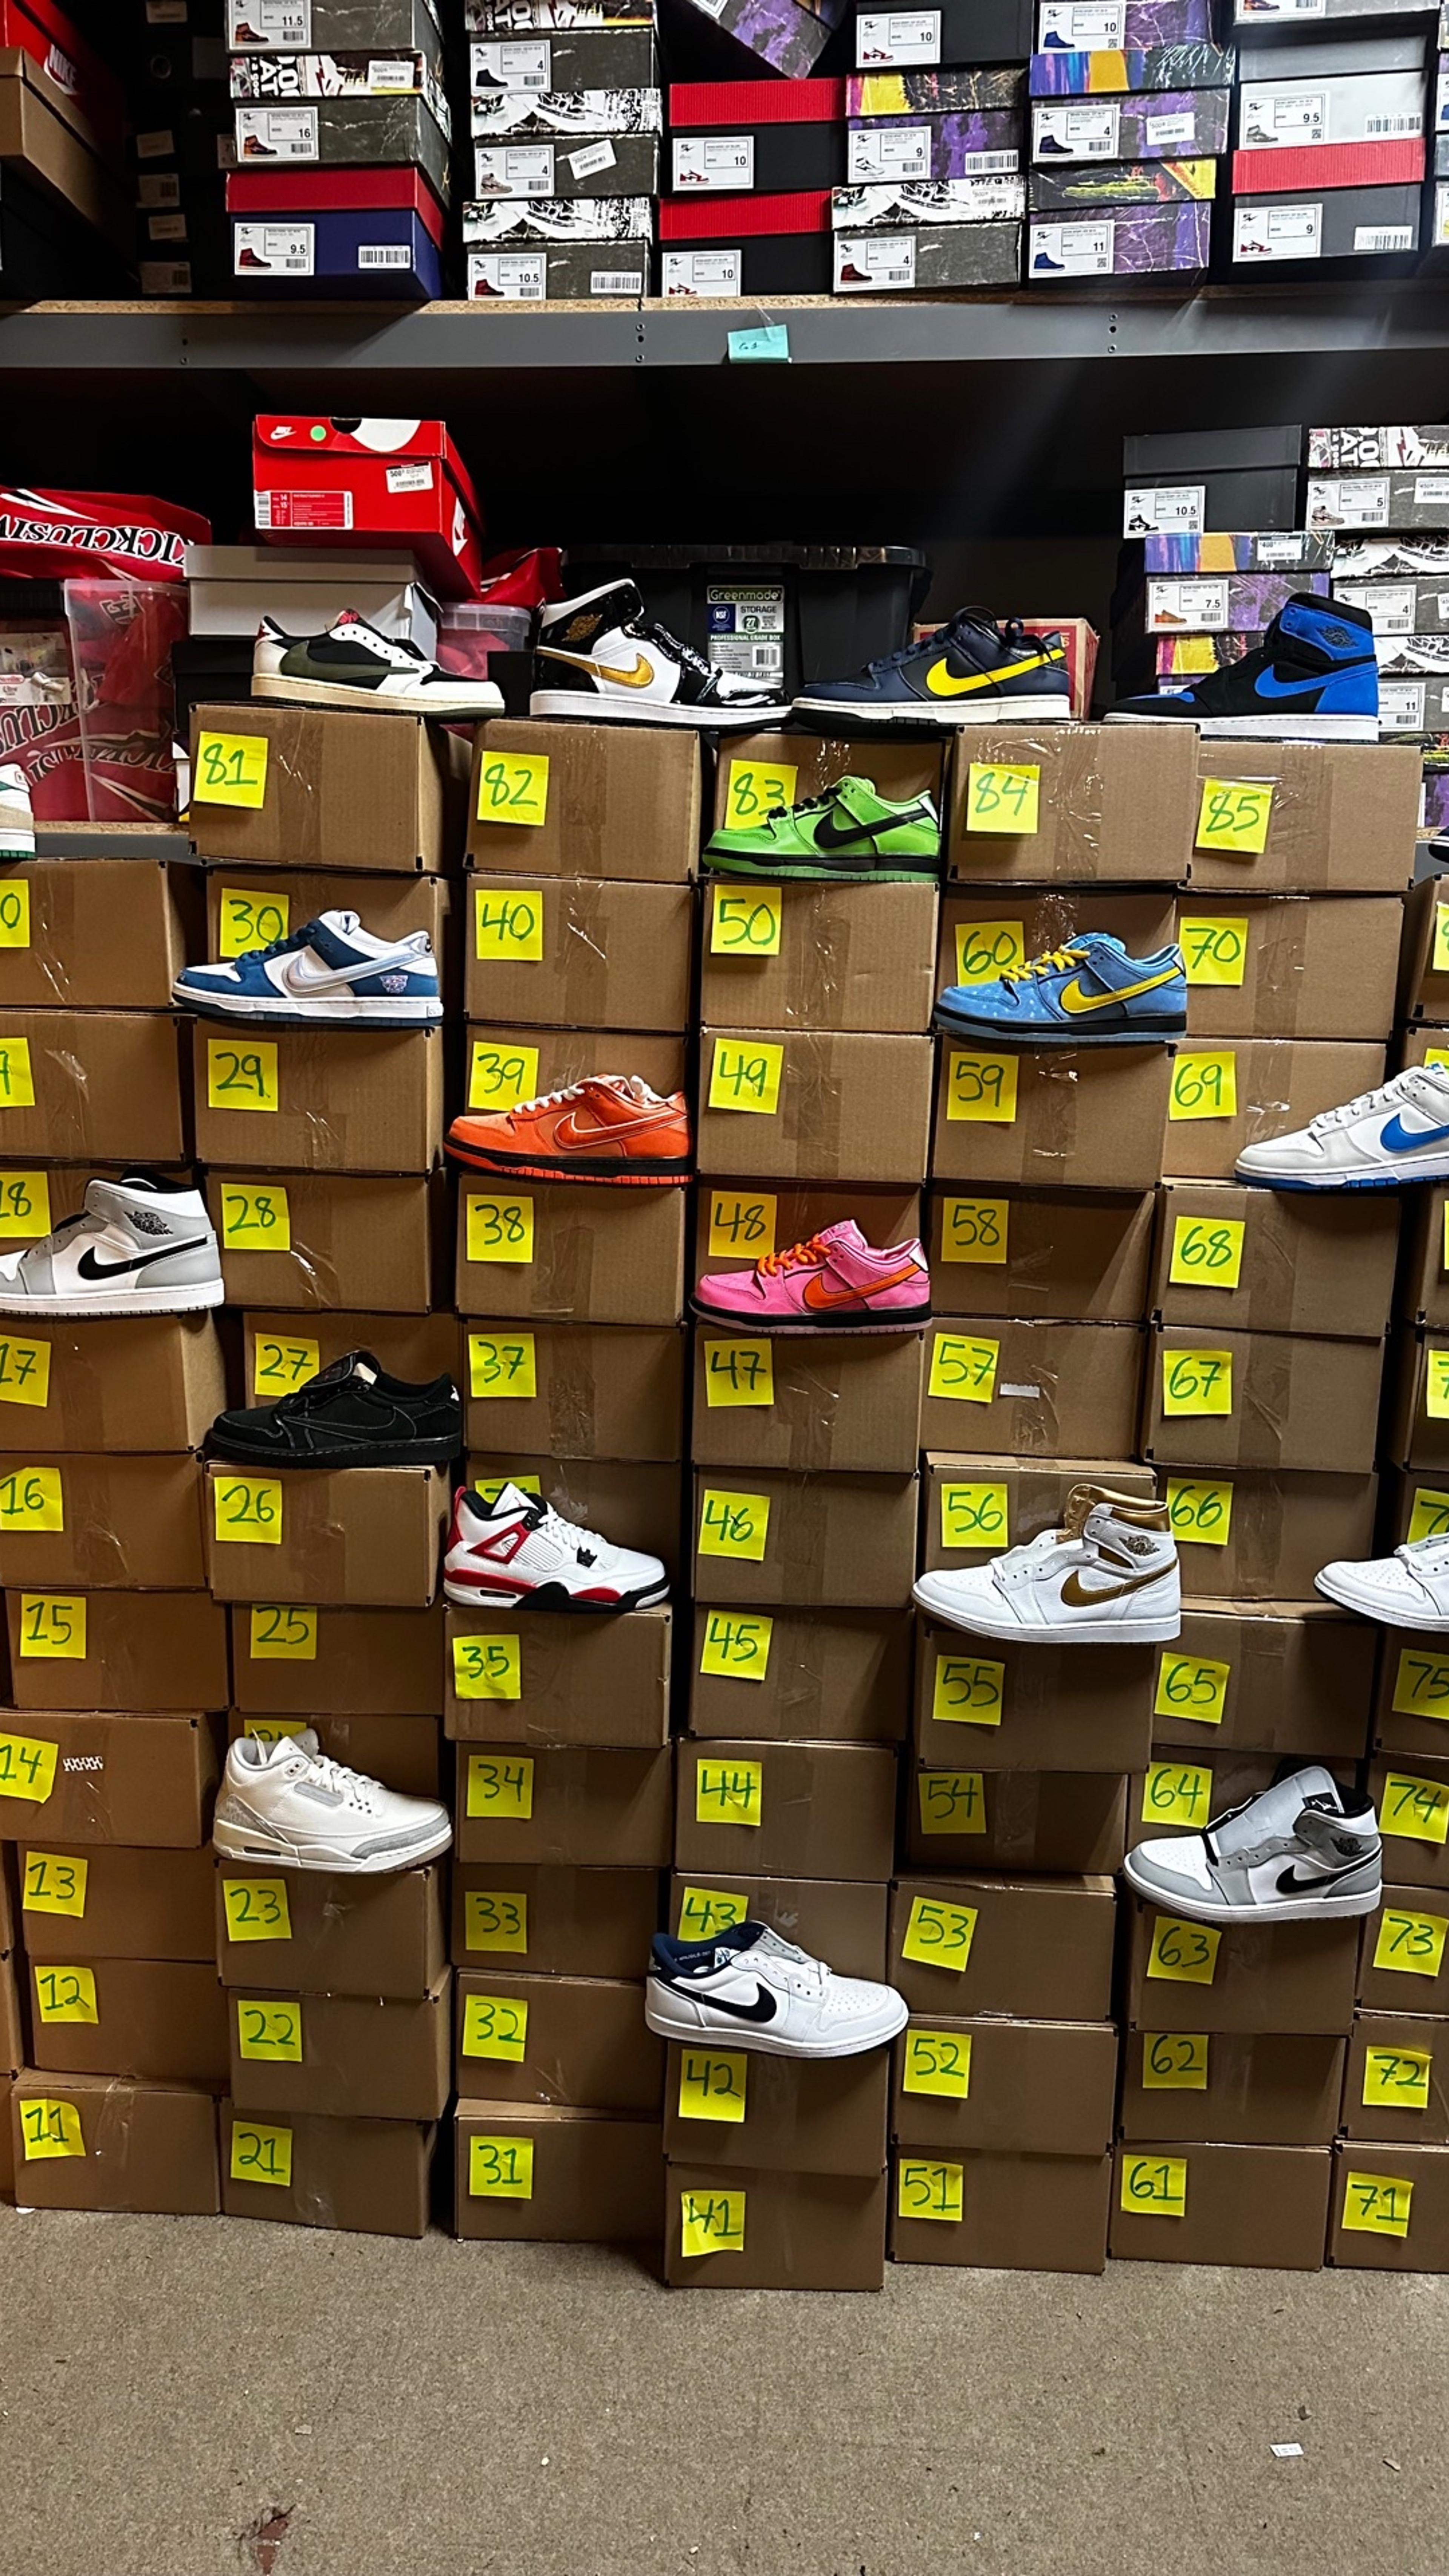 Preview image for the show titled "Every box has sneakers! Over $20,000 in hype sneakers " at Today @ 10:00 PM